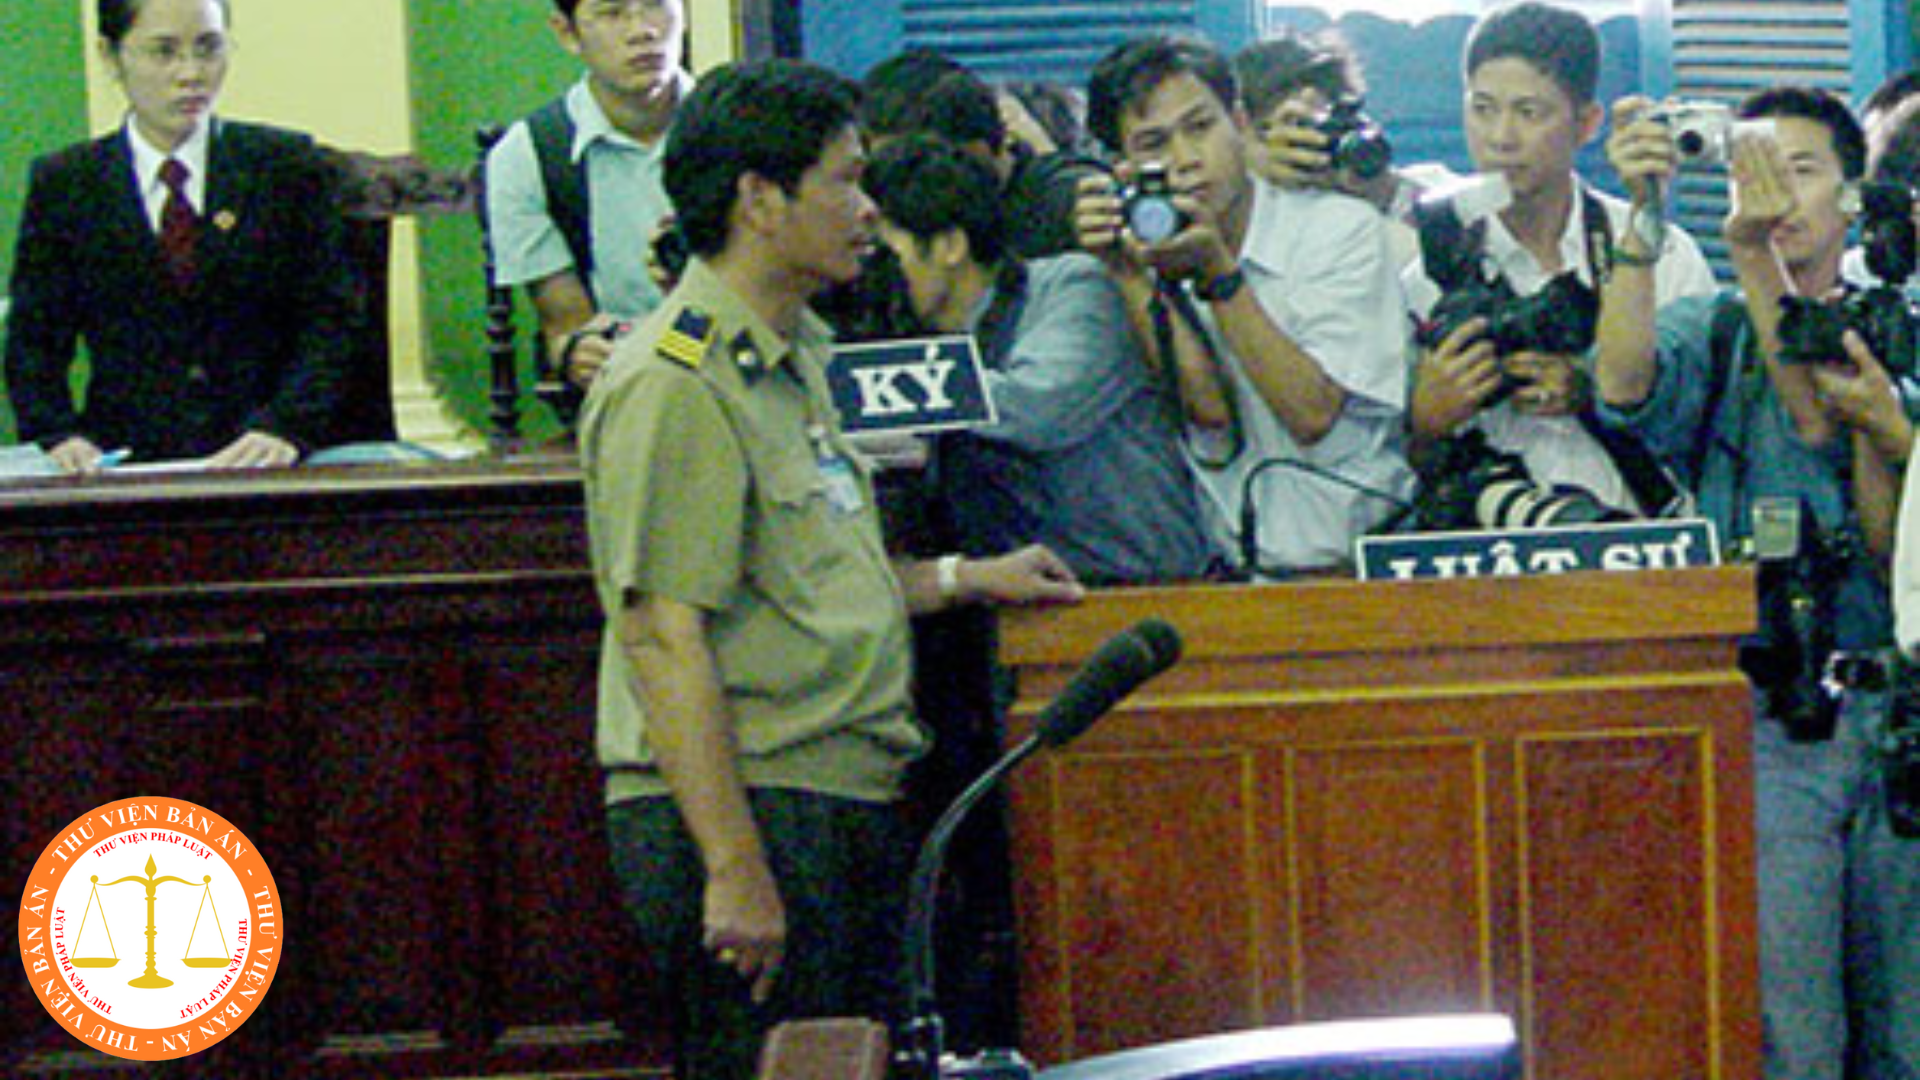 Vietnam: Is it legal to post images of suspects and defendants on press?